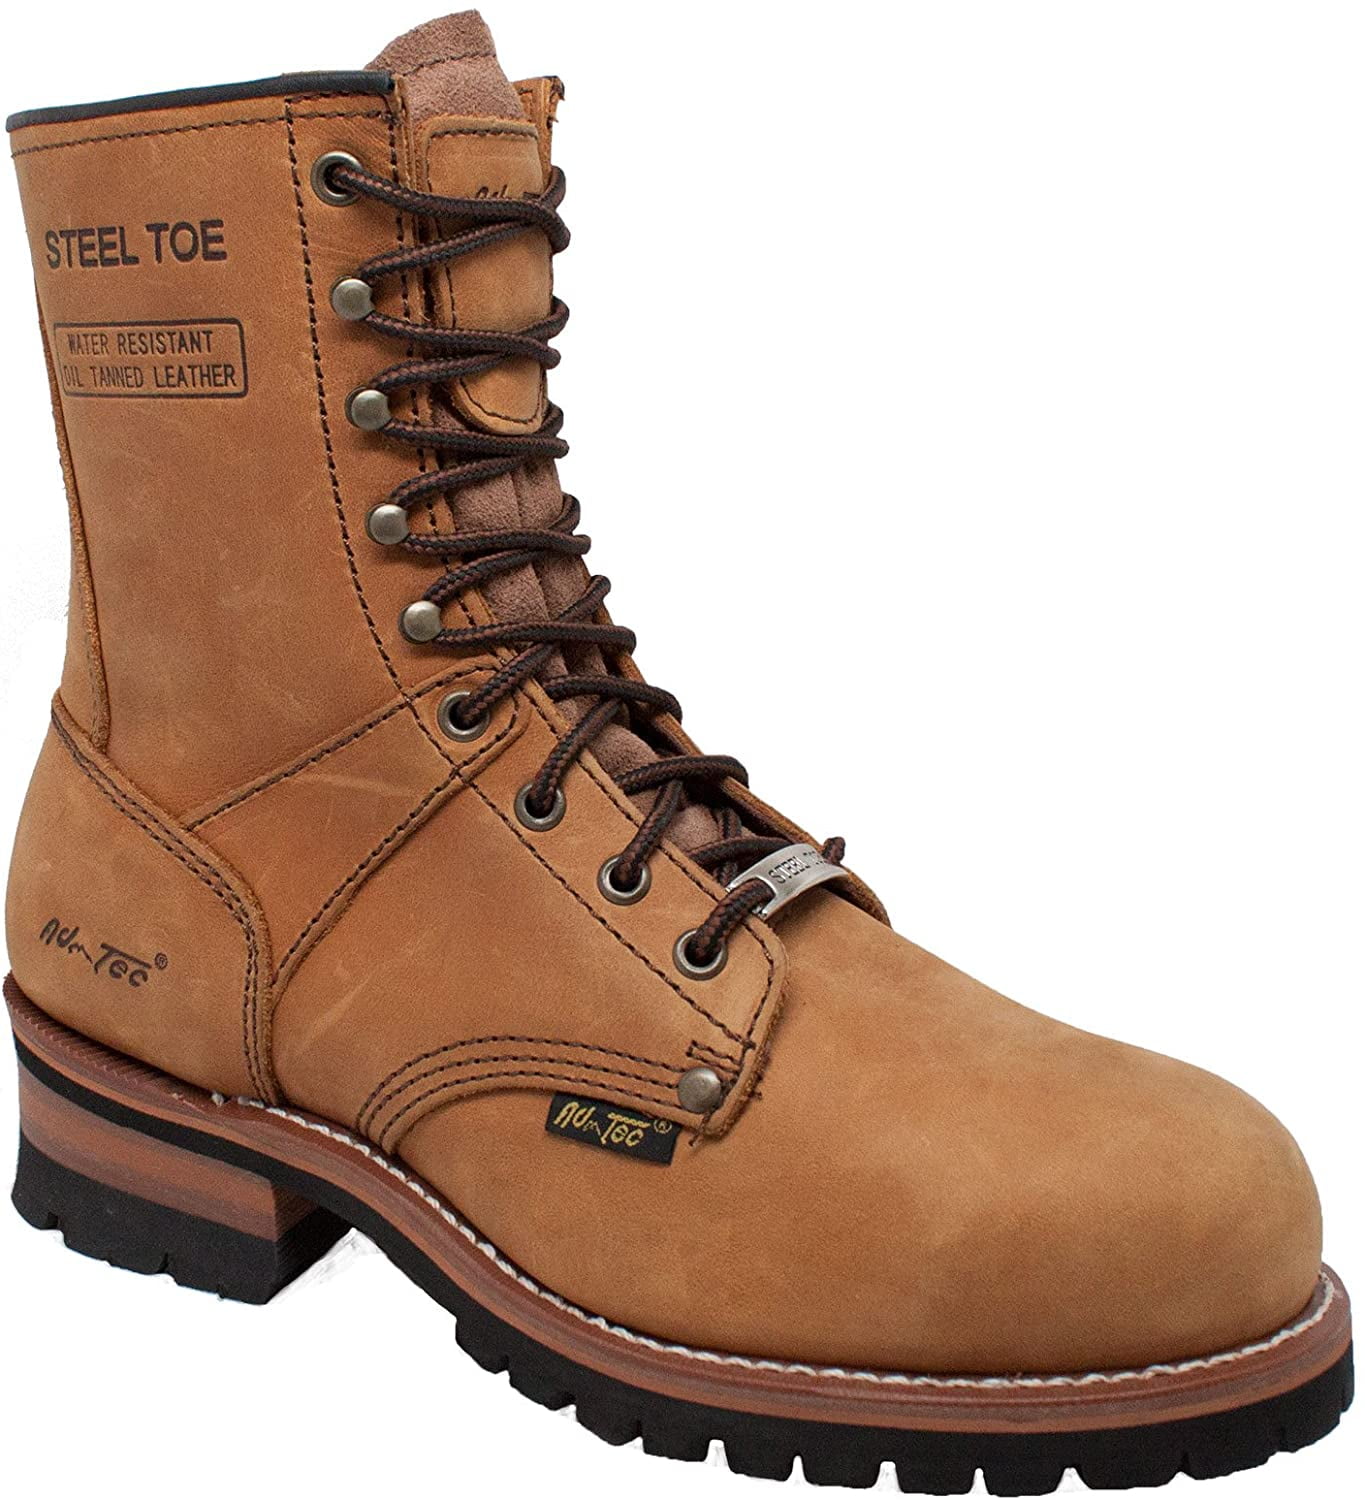 Ad Tec Men's Welt Construction & Utility Footwear Durable and Long Logger Boot